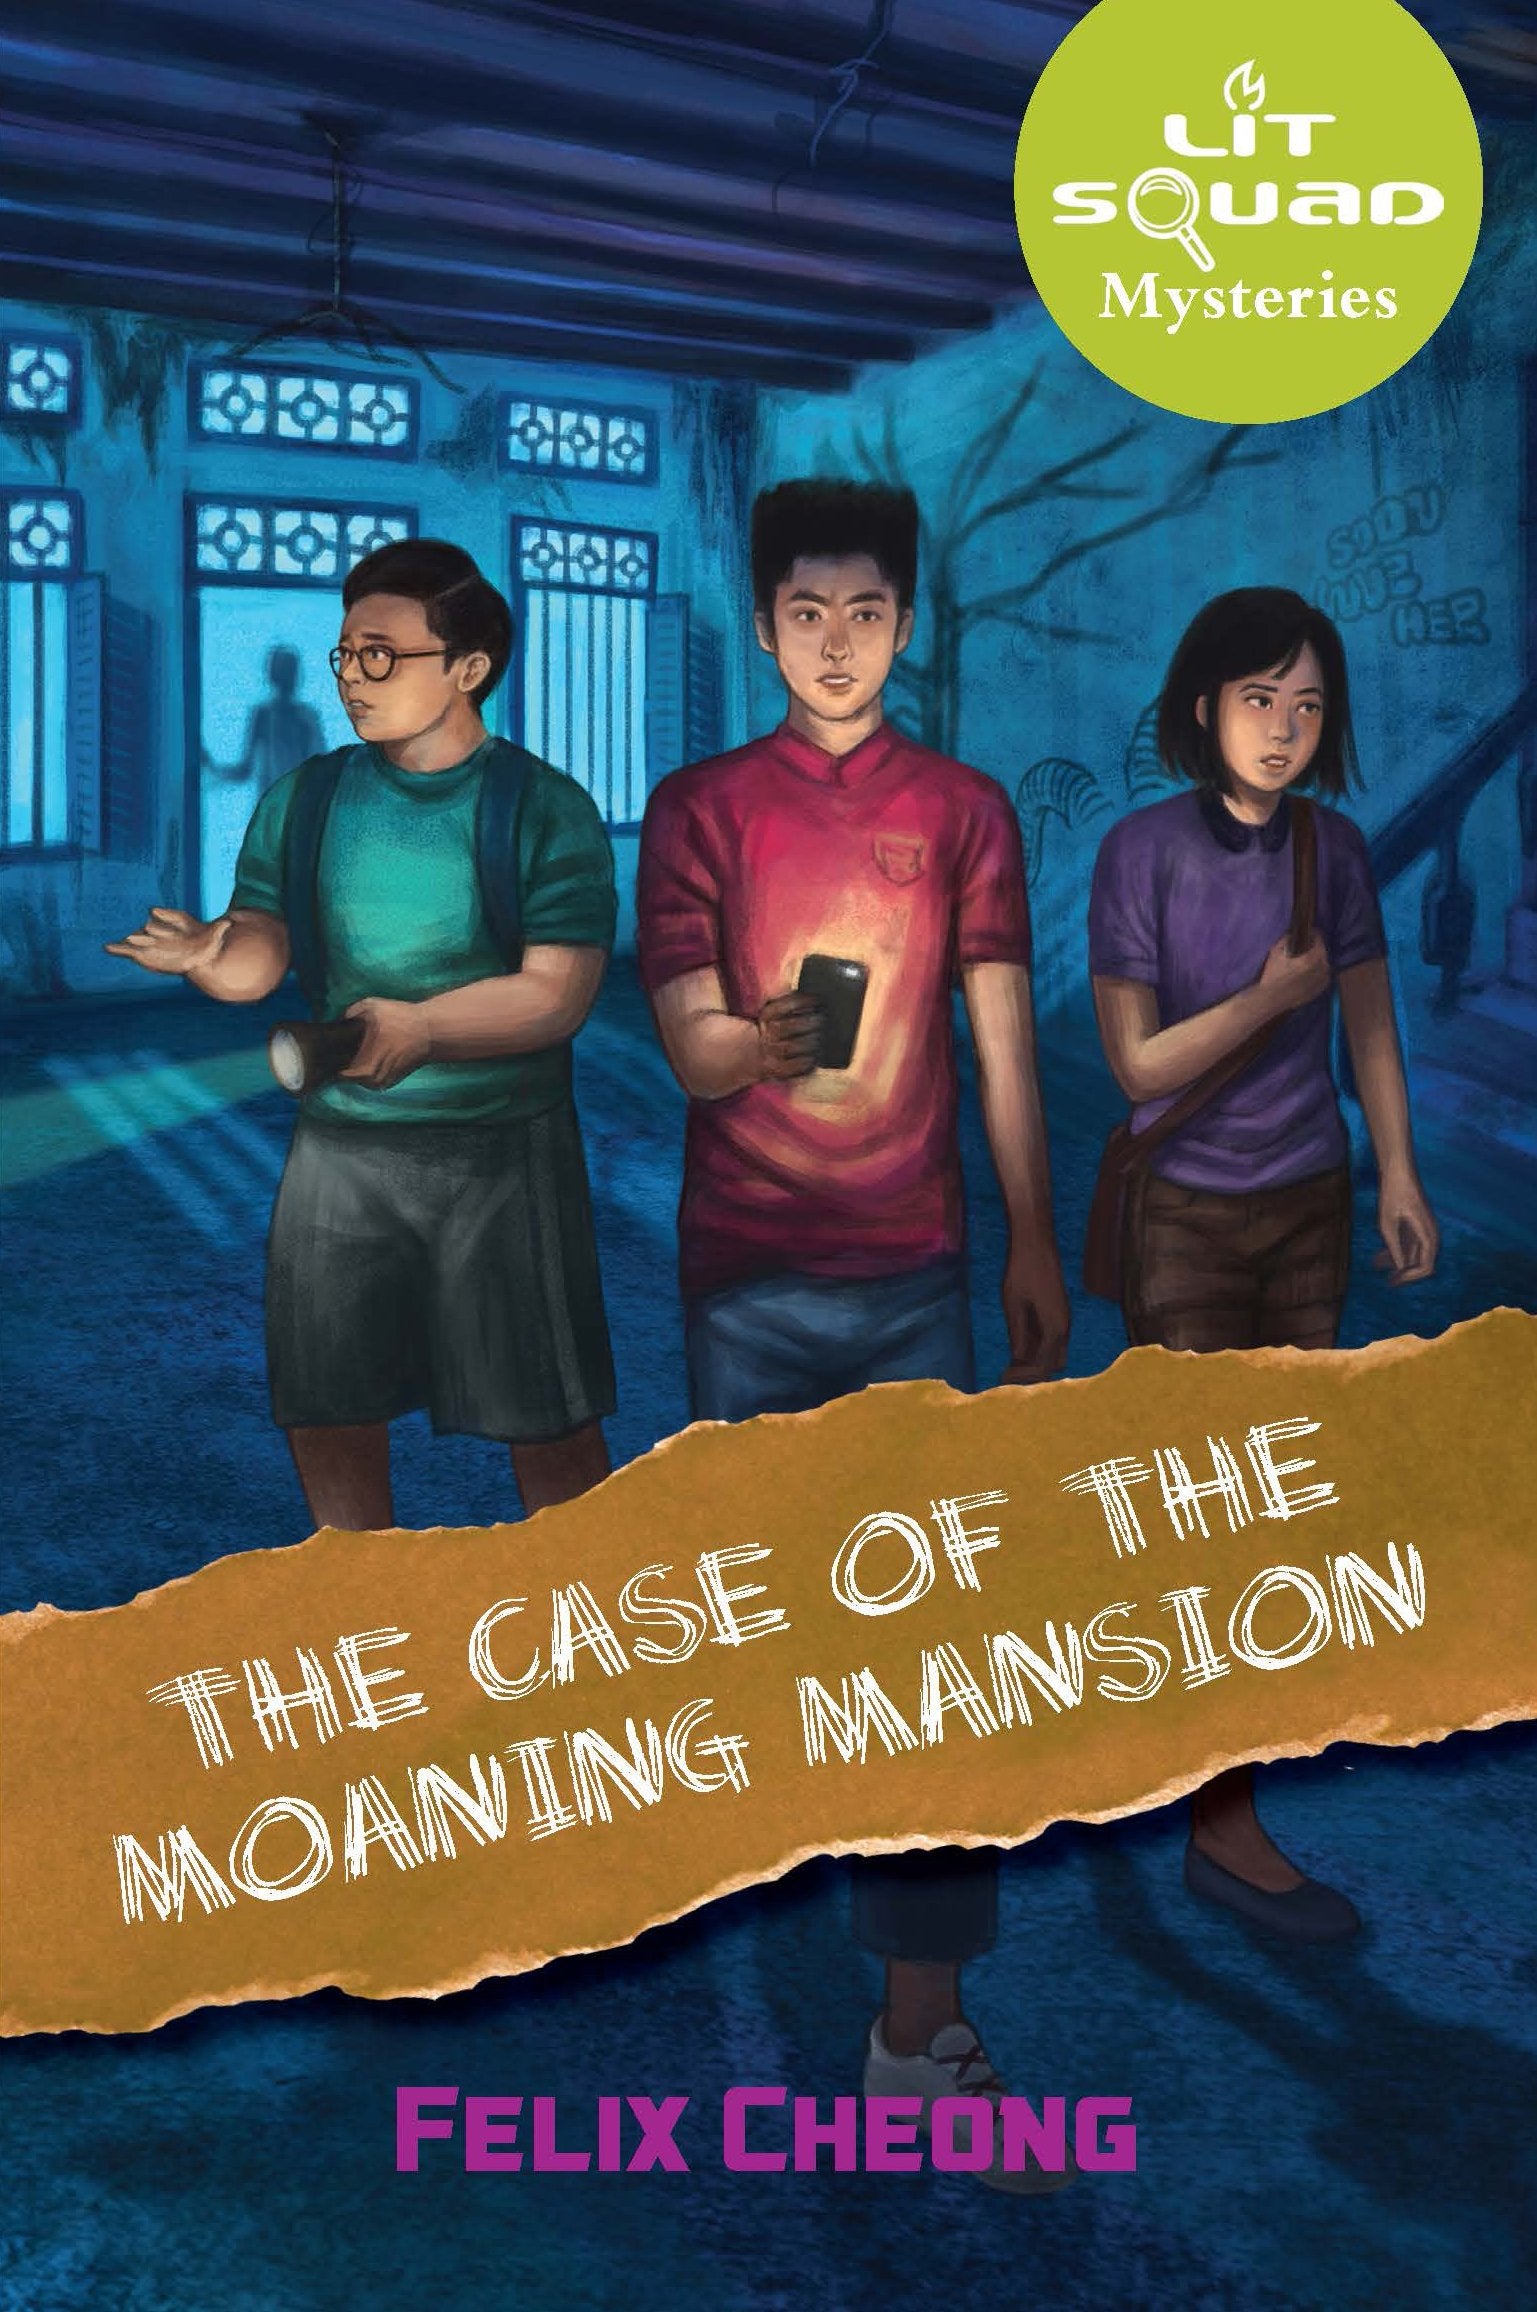 Lit Squad Mysteries: The Case of the Moaning Mansion (Book 1)